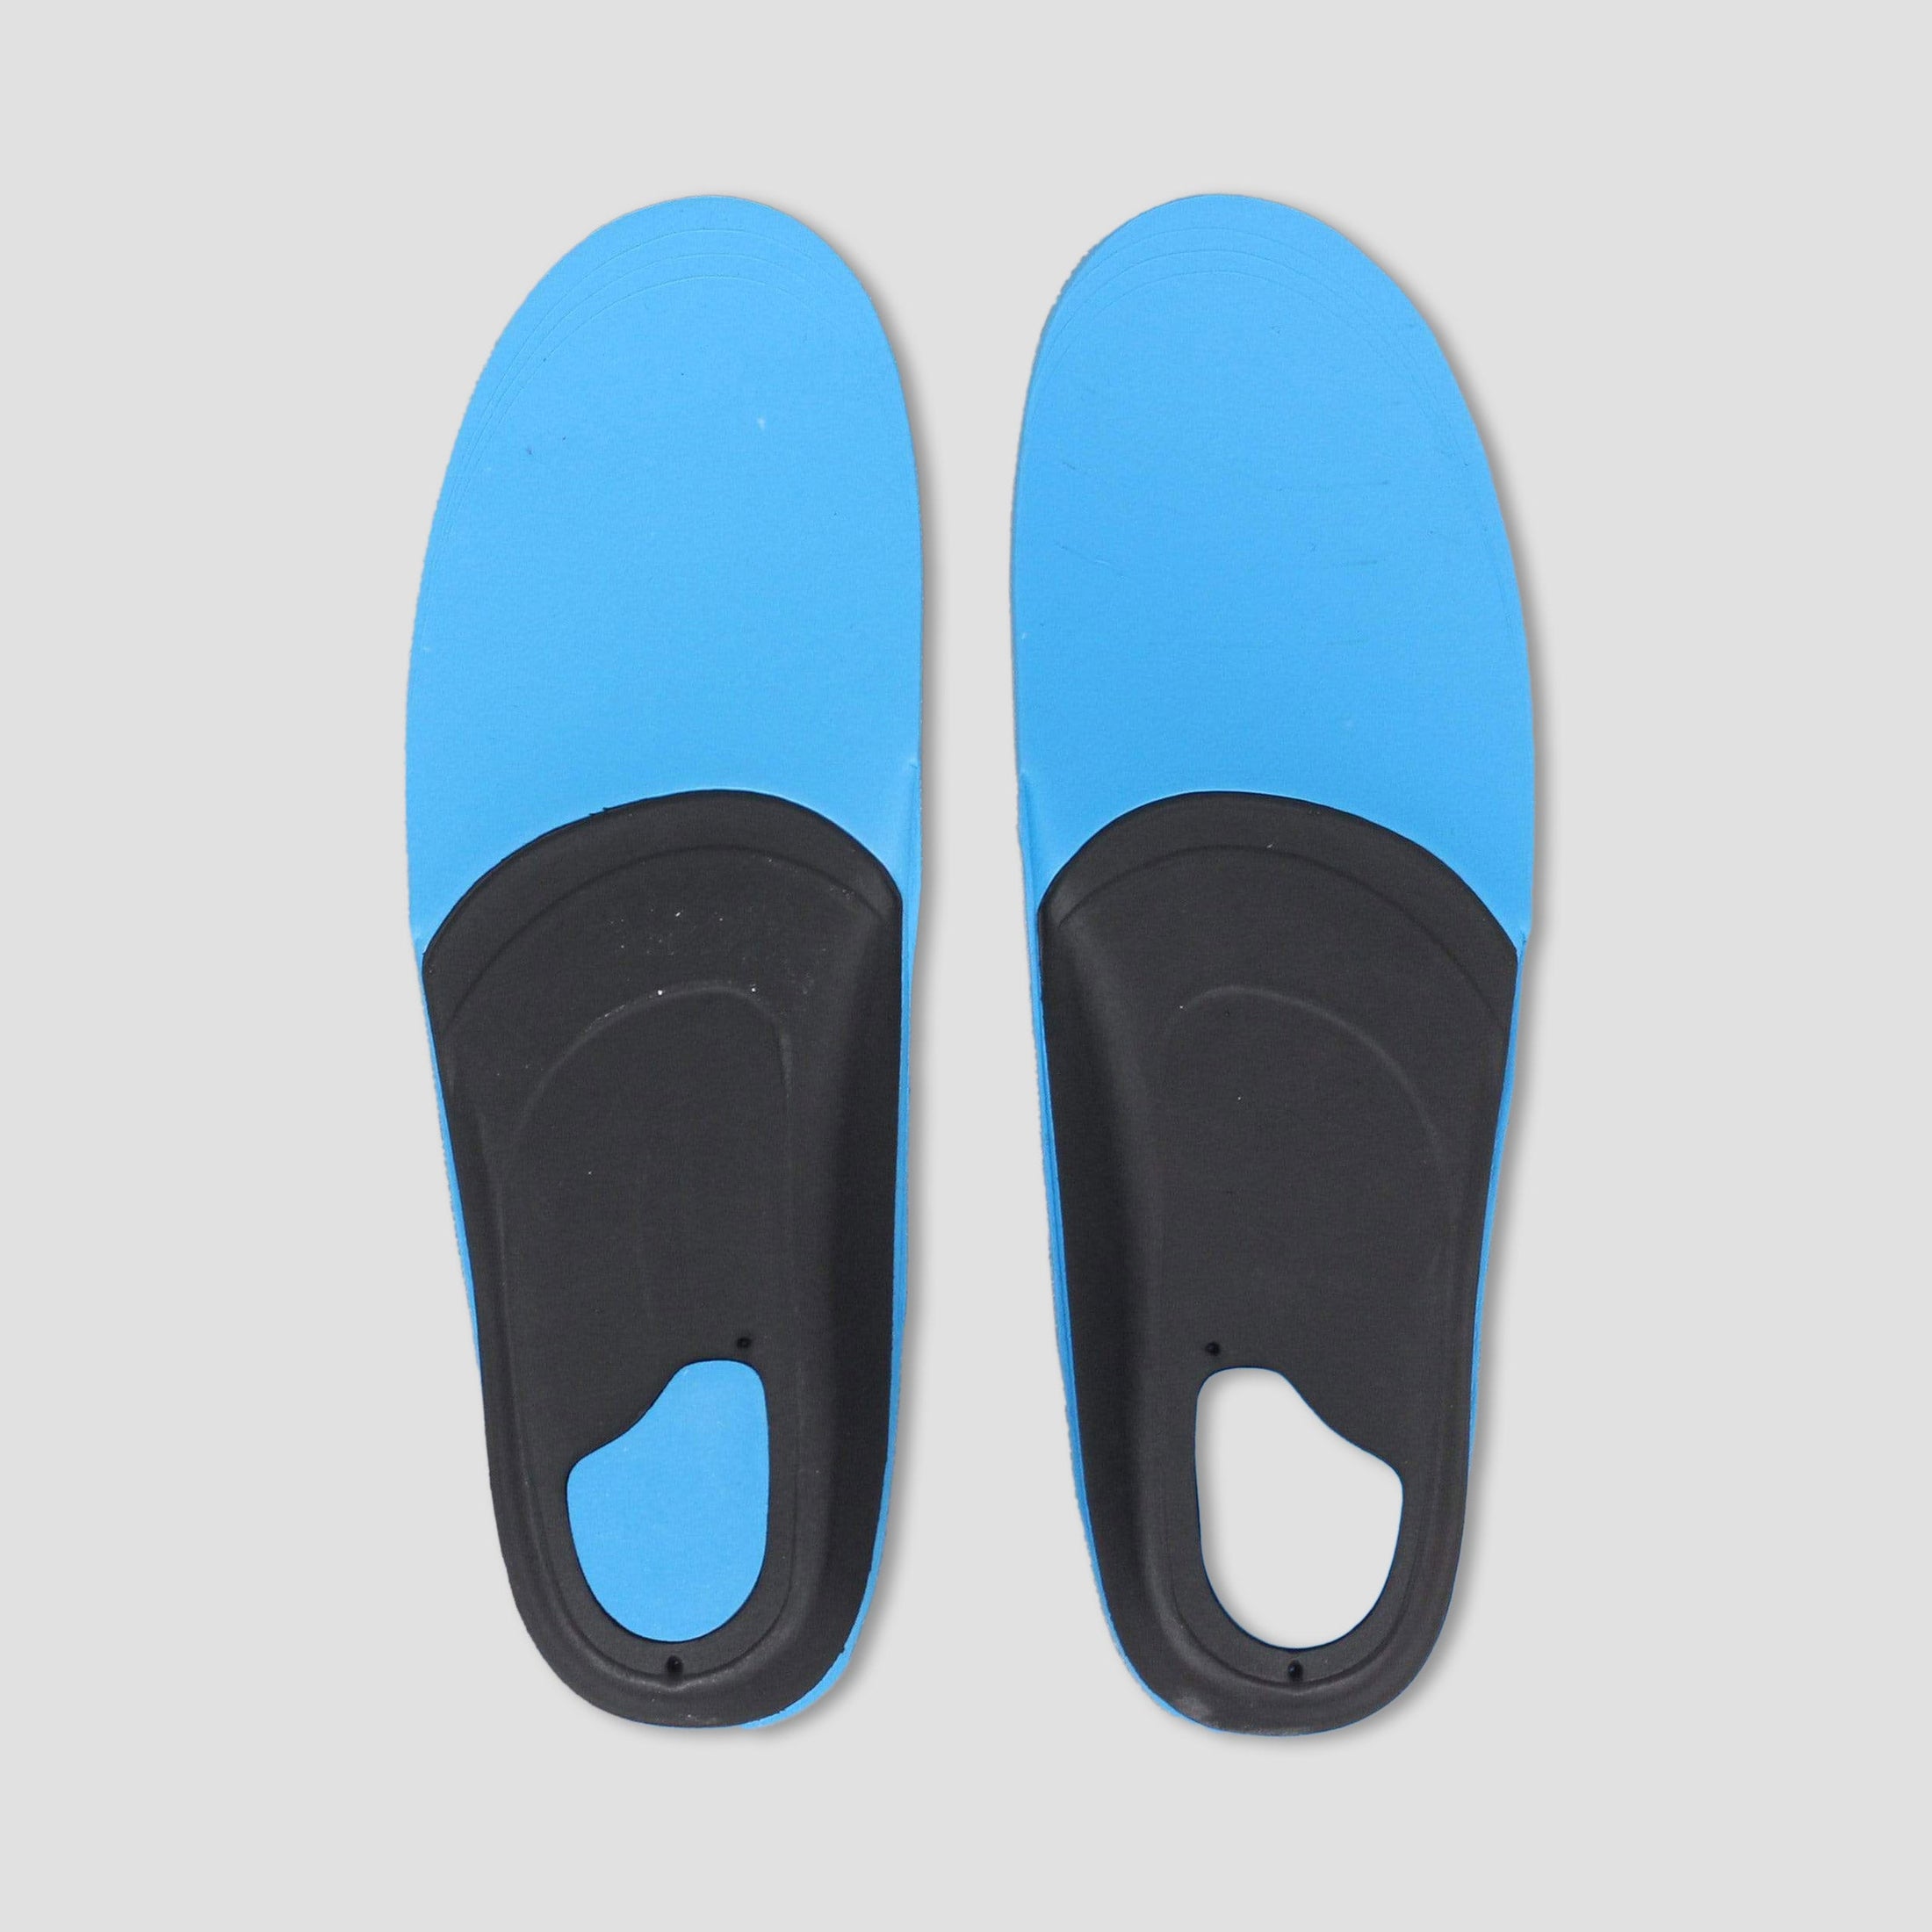 Remind Chico Brenes Cougar Cush Insoles